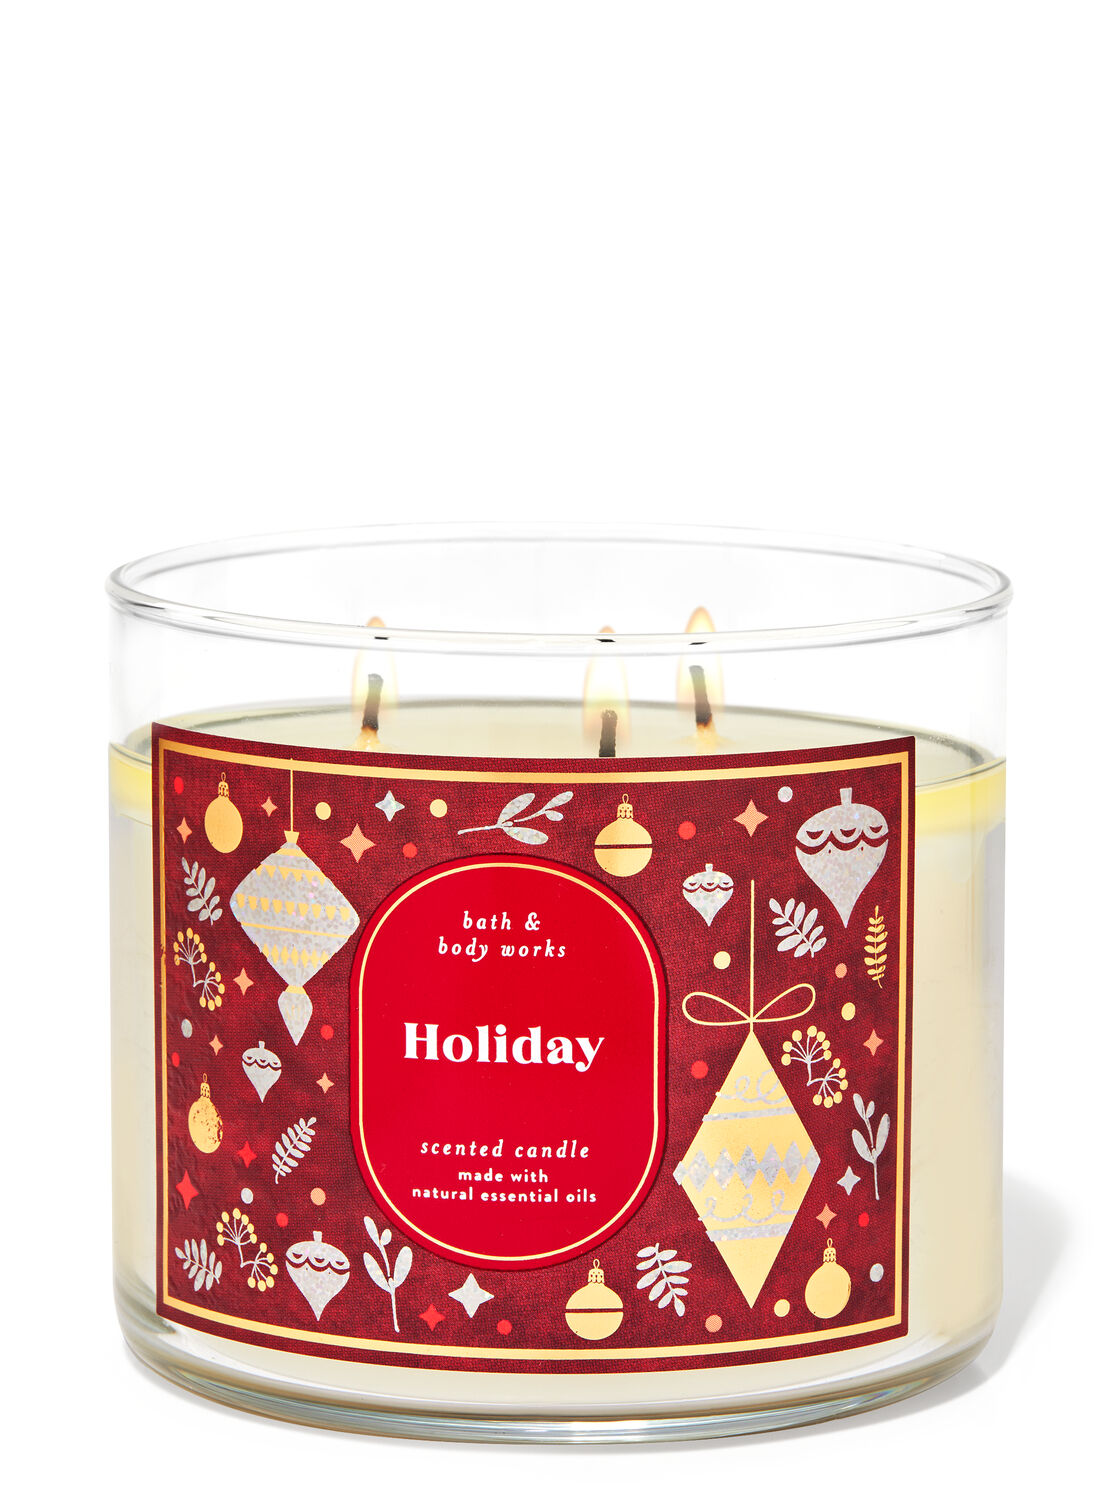 Bath and body works Large 3 wick Scented Candles Seasonal Holiday Cheap Ship 